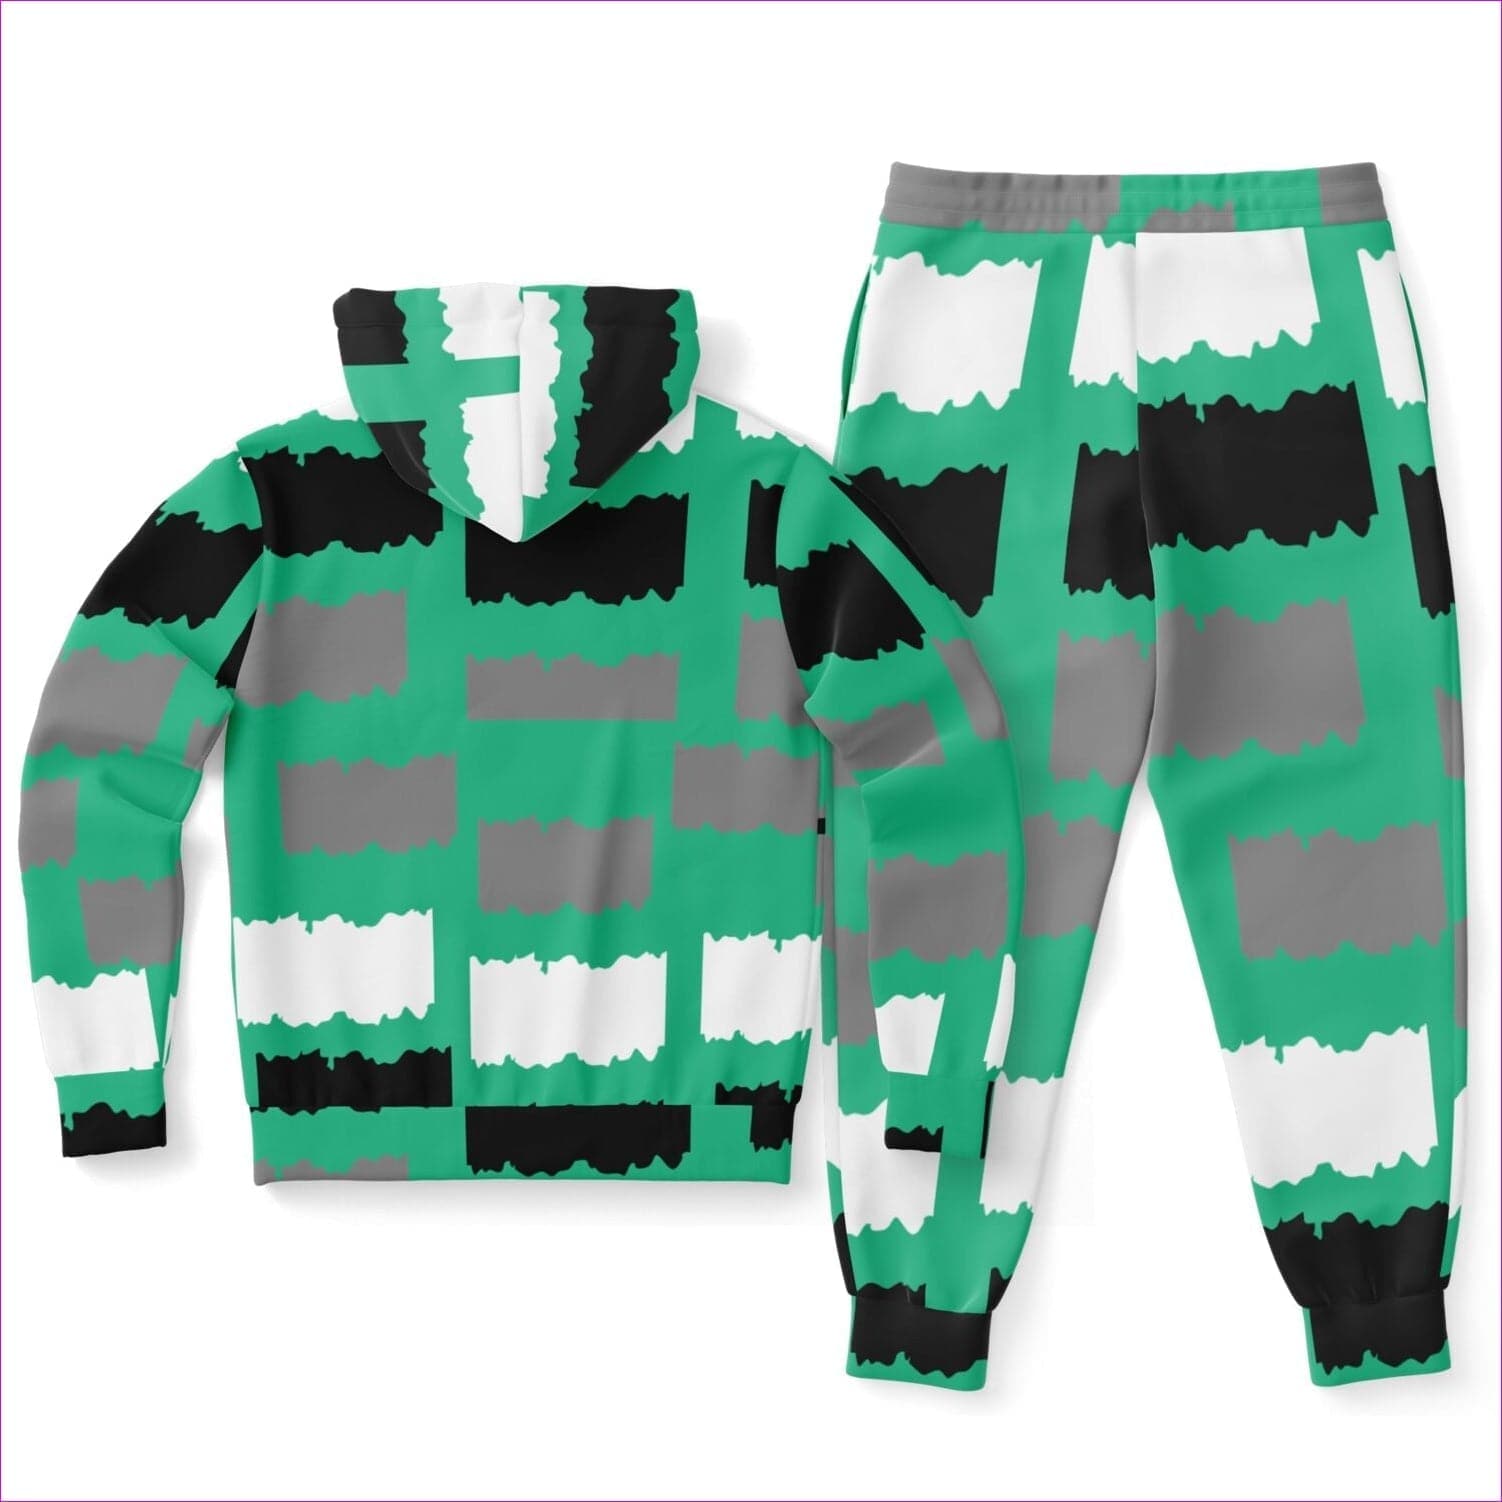 - Deity Womens Premium Fashion Jogging Suit in Emerald - Fashion Hoodie & Jogger - AOP at TFC&H Co.